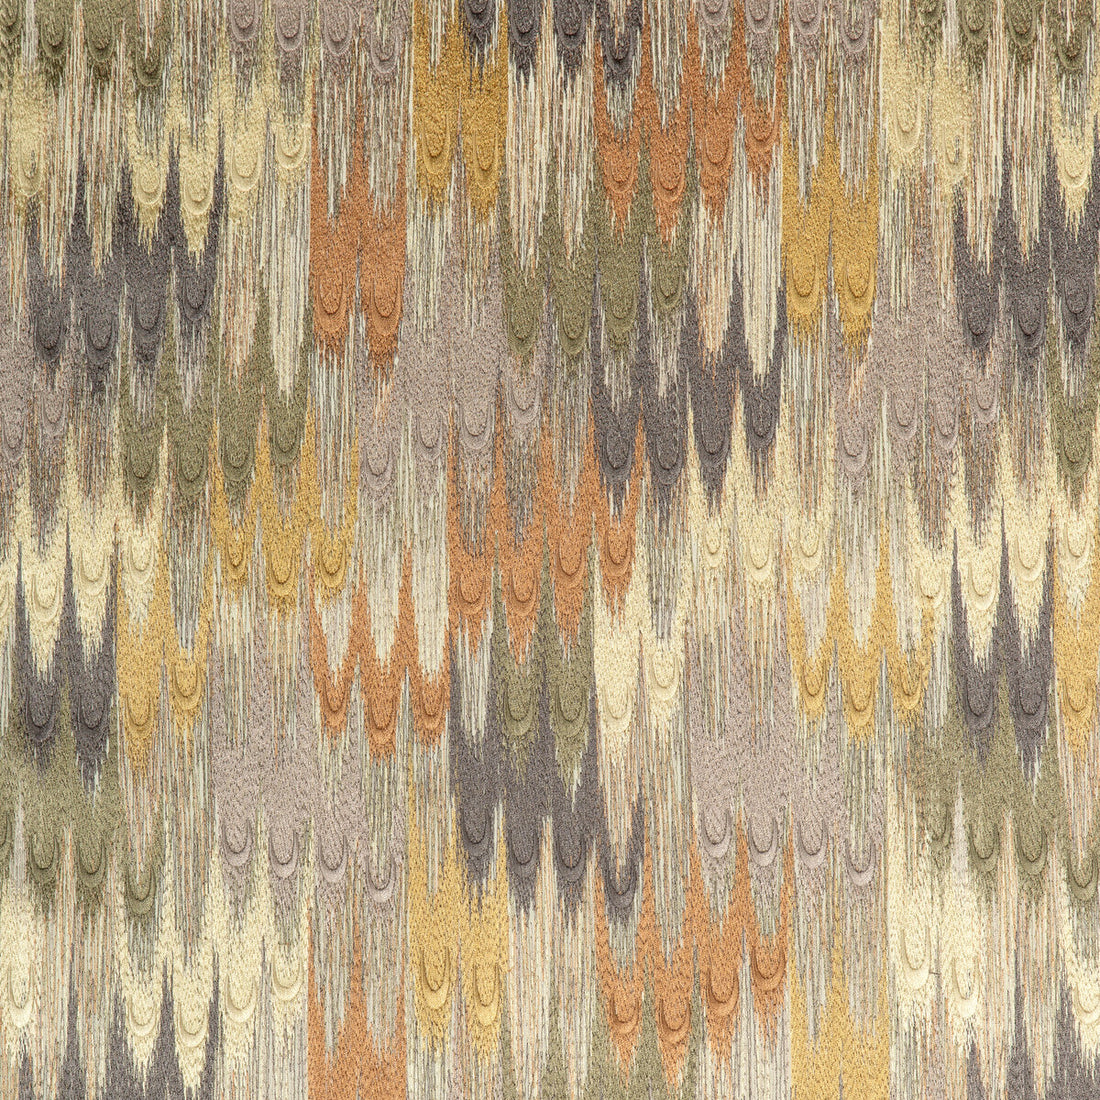 Duval Emb fabric in pumice/opal color - pattern 8023142.1611.0 - by Brunschwig &amp; Fils in the Celeste collection